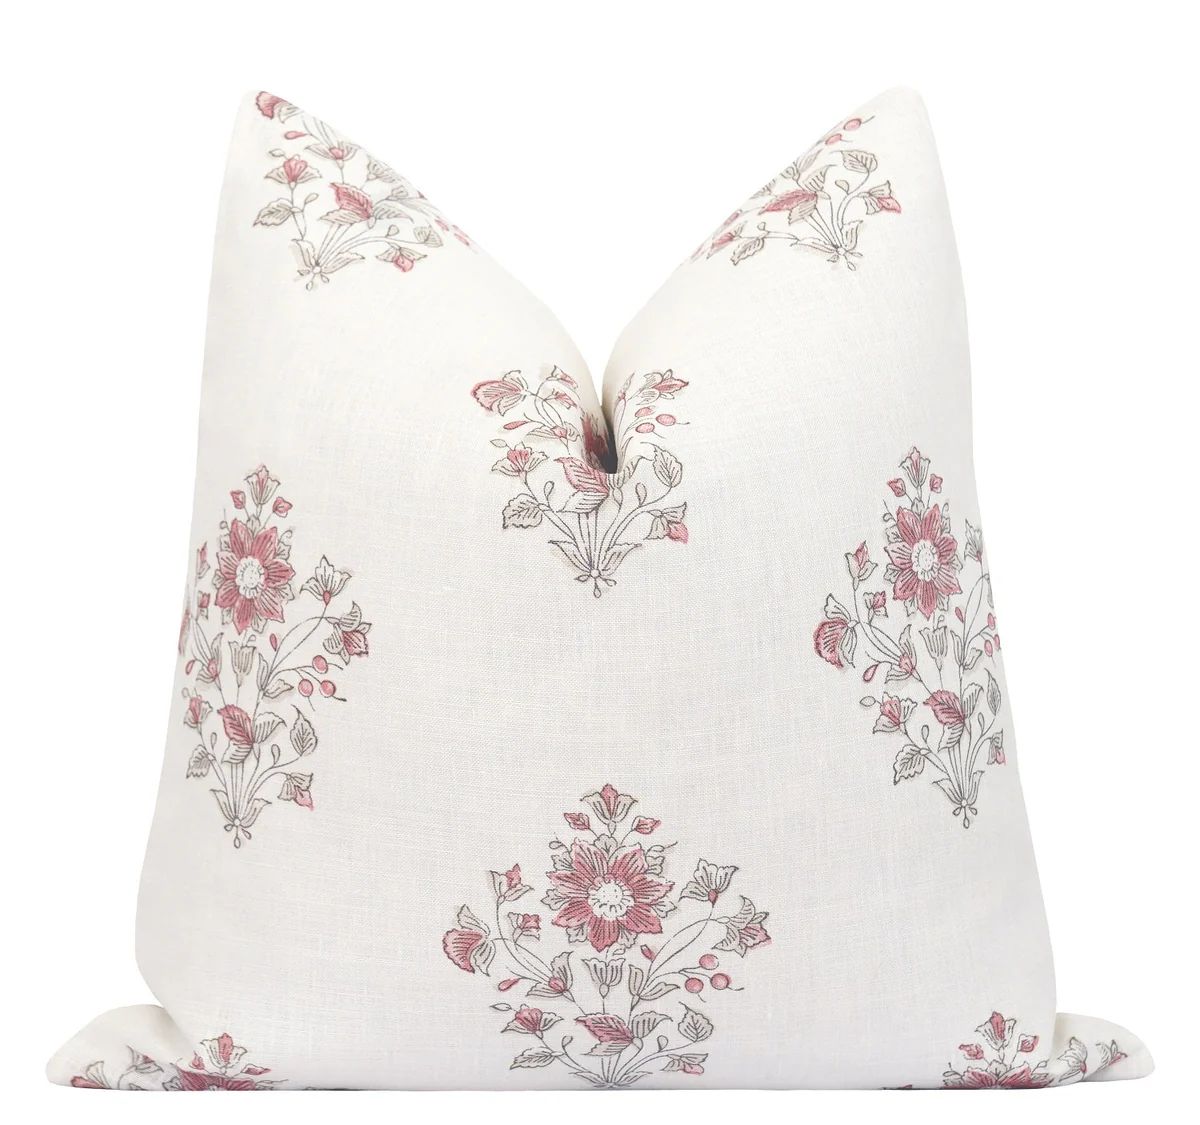 Beatrice Bouquet Pink Floral Throw Pillow | Land of Pillows